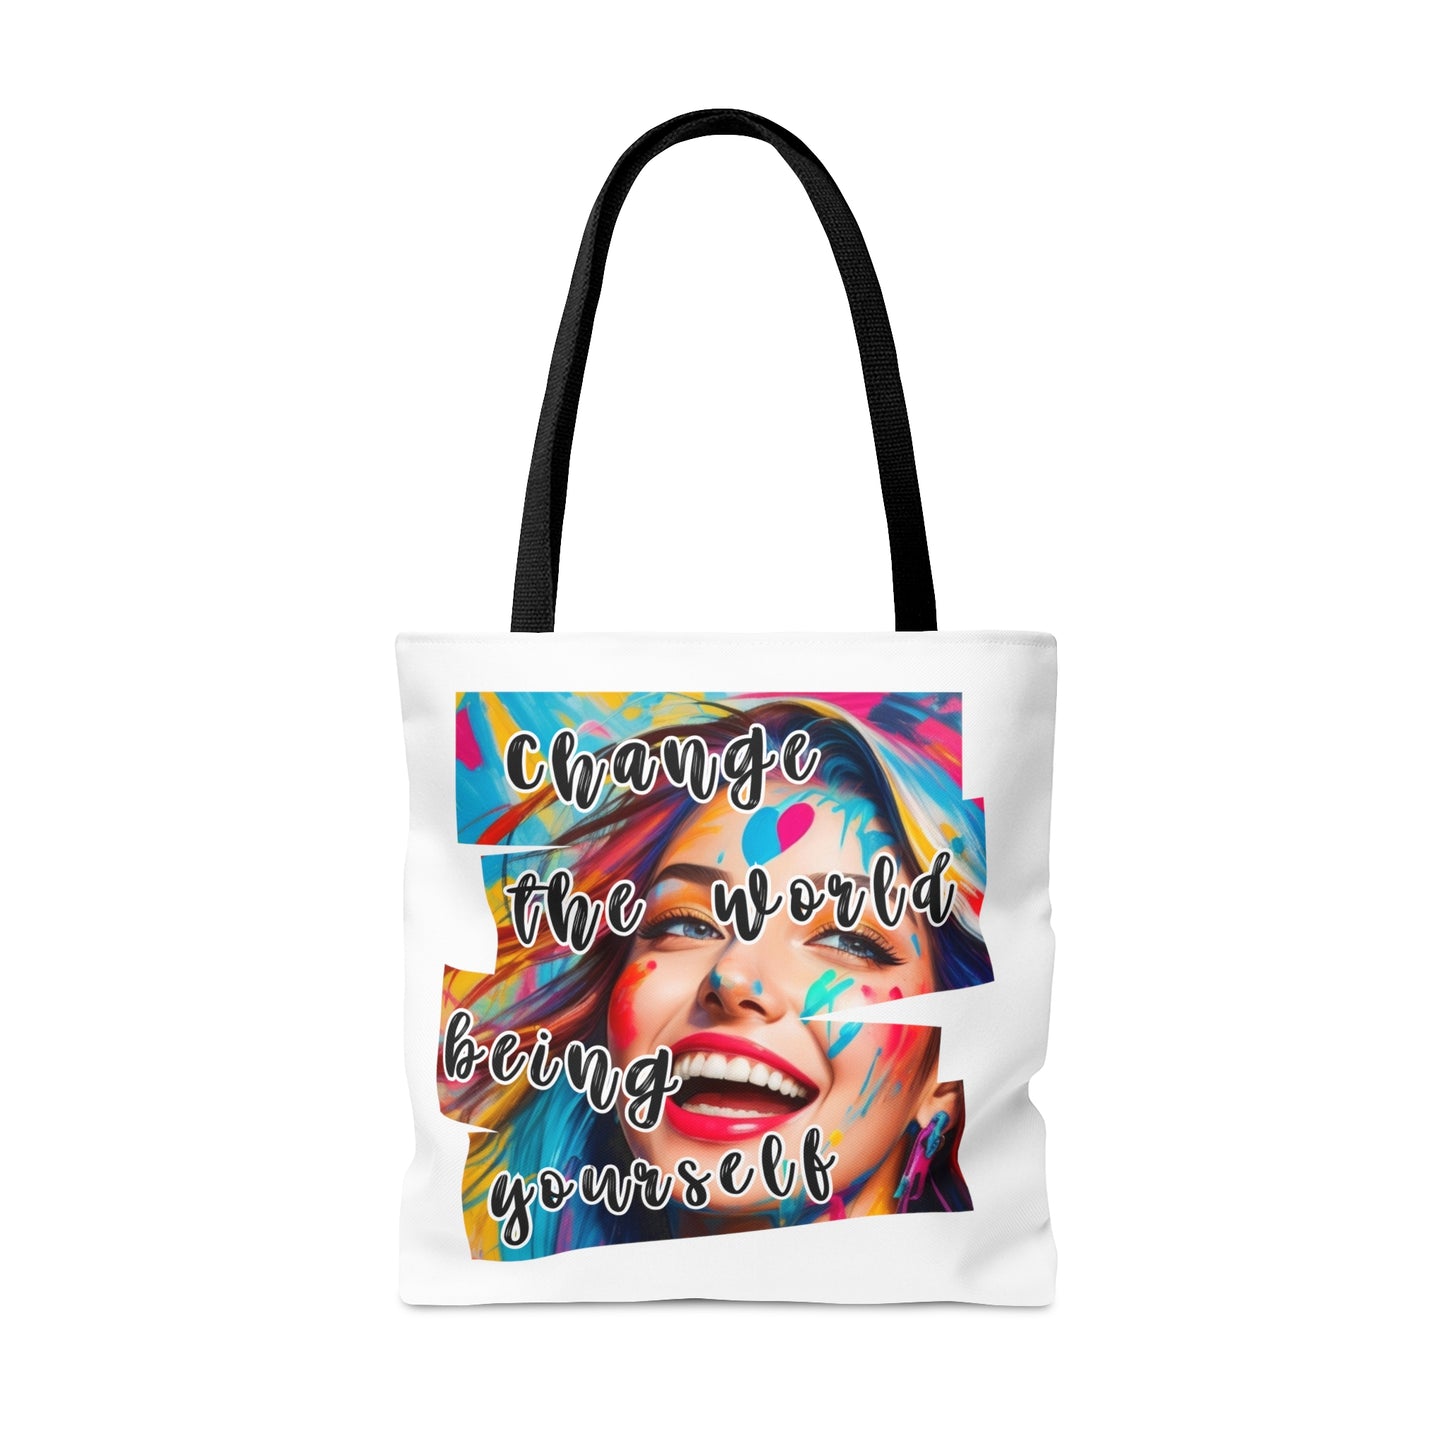 Tote Bag - Love and freedom - 02